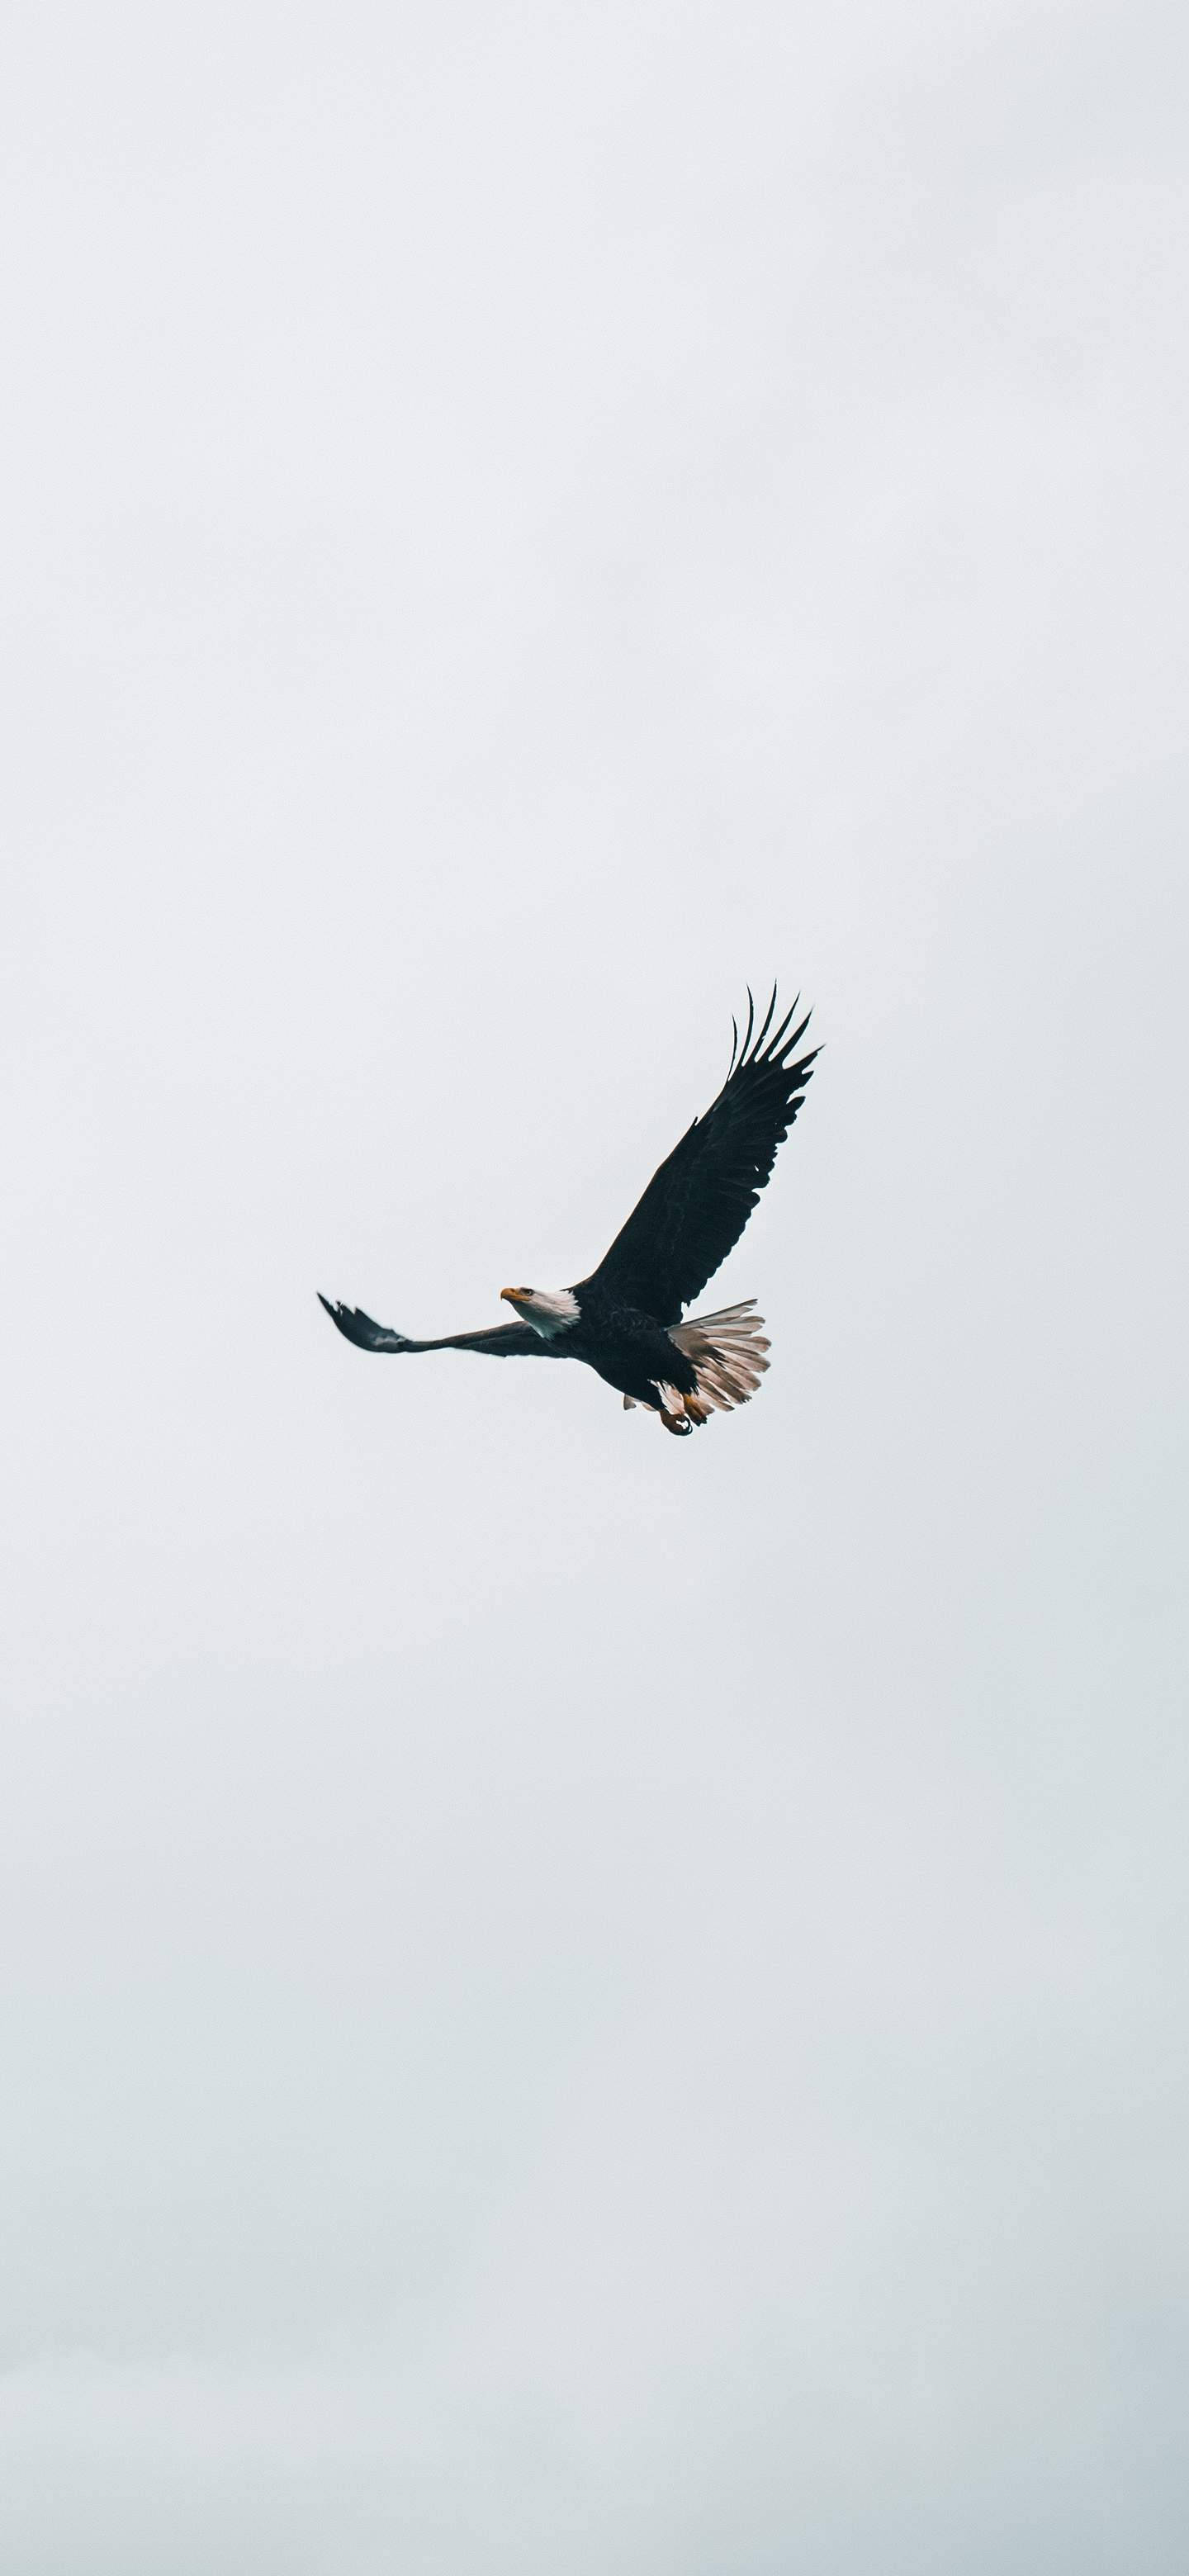 Stunning Eagle in Mid-flight Displayed on the Crisp Screen of OnePlus 7 Pro Wallpaper